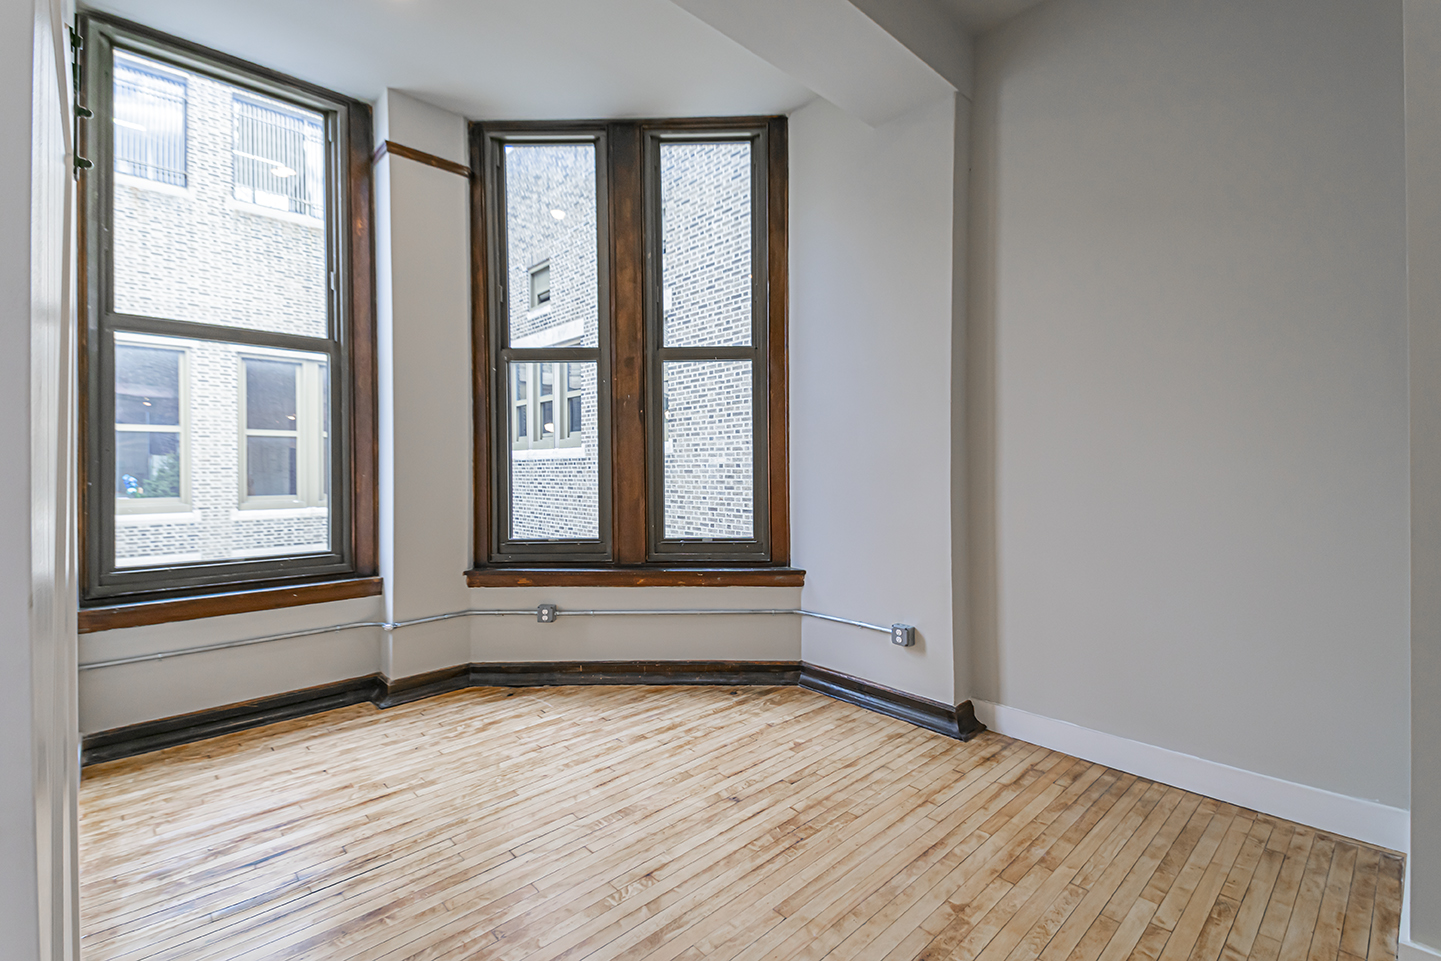 Property Photo For 1300 S. 19th St, Unit 103